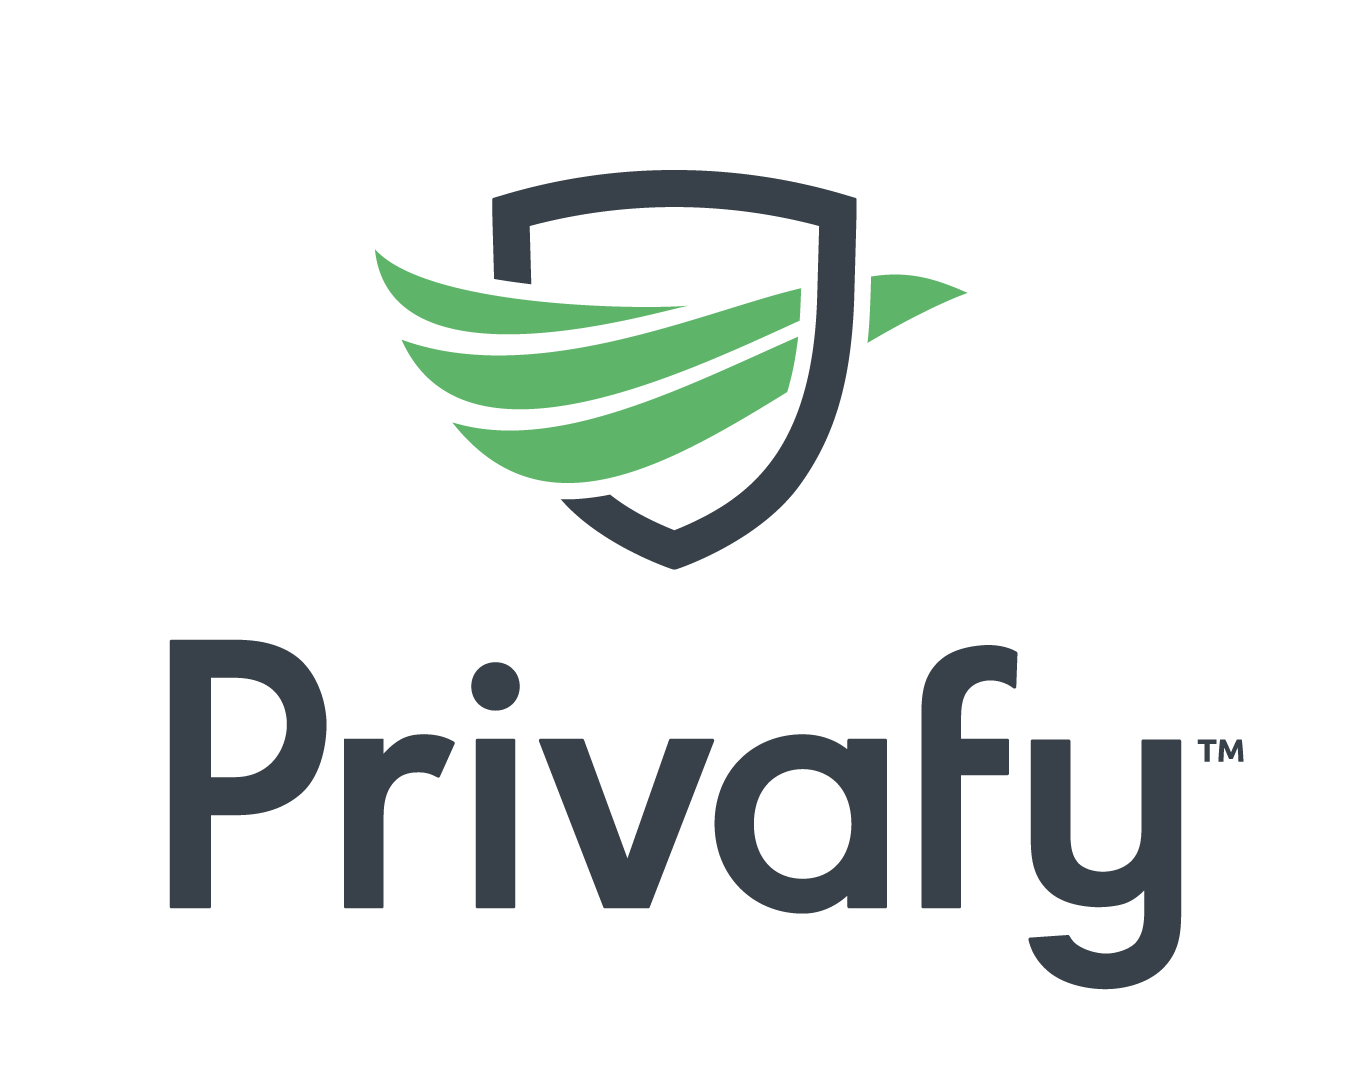 Privafy-Stacked-Lockup-Color-RGB@2x.png